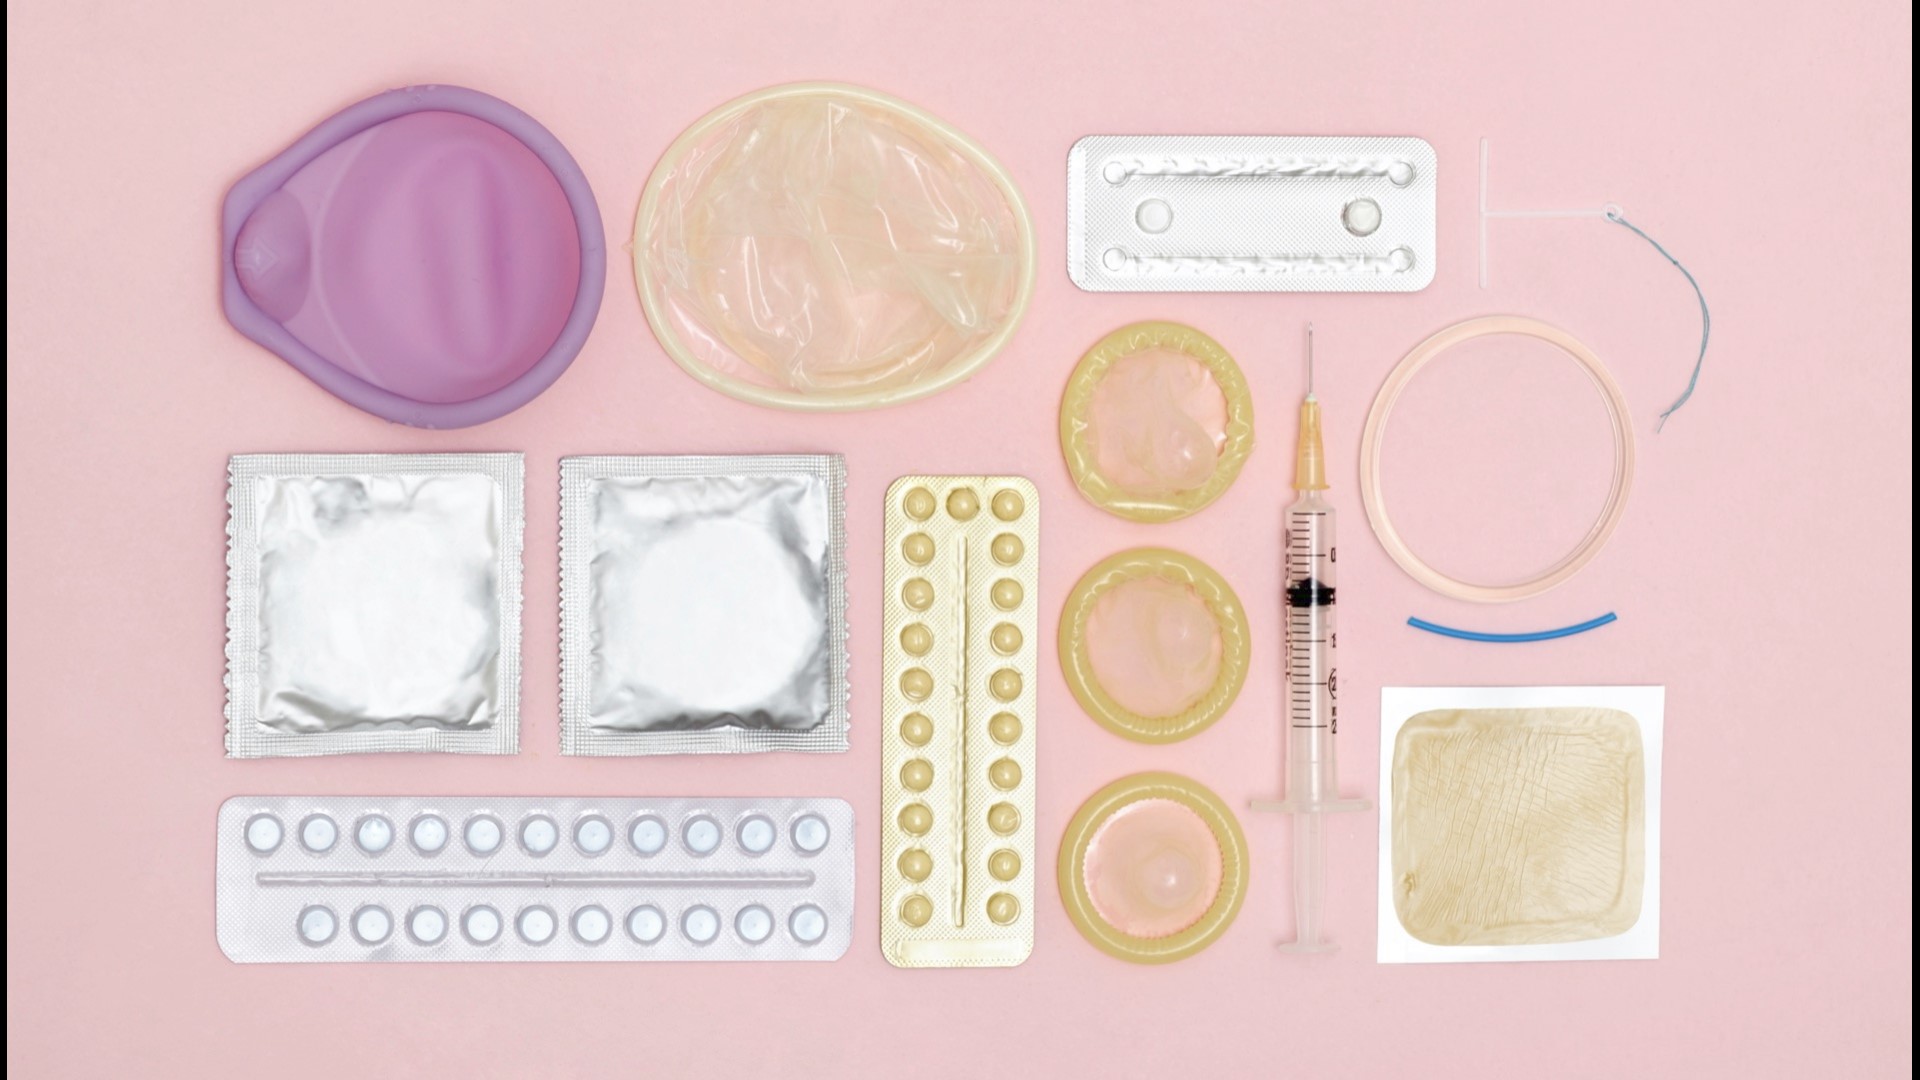 When it comes to different types of birth control, 56 percent of women say they didn't get sufficient education, according to a new study from Paragard IUD.